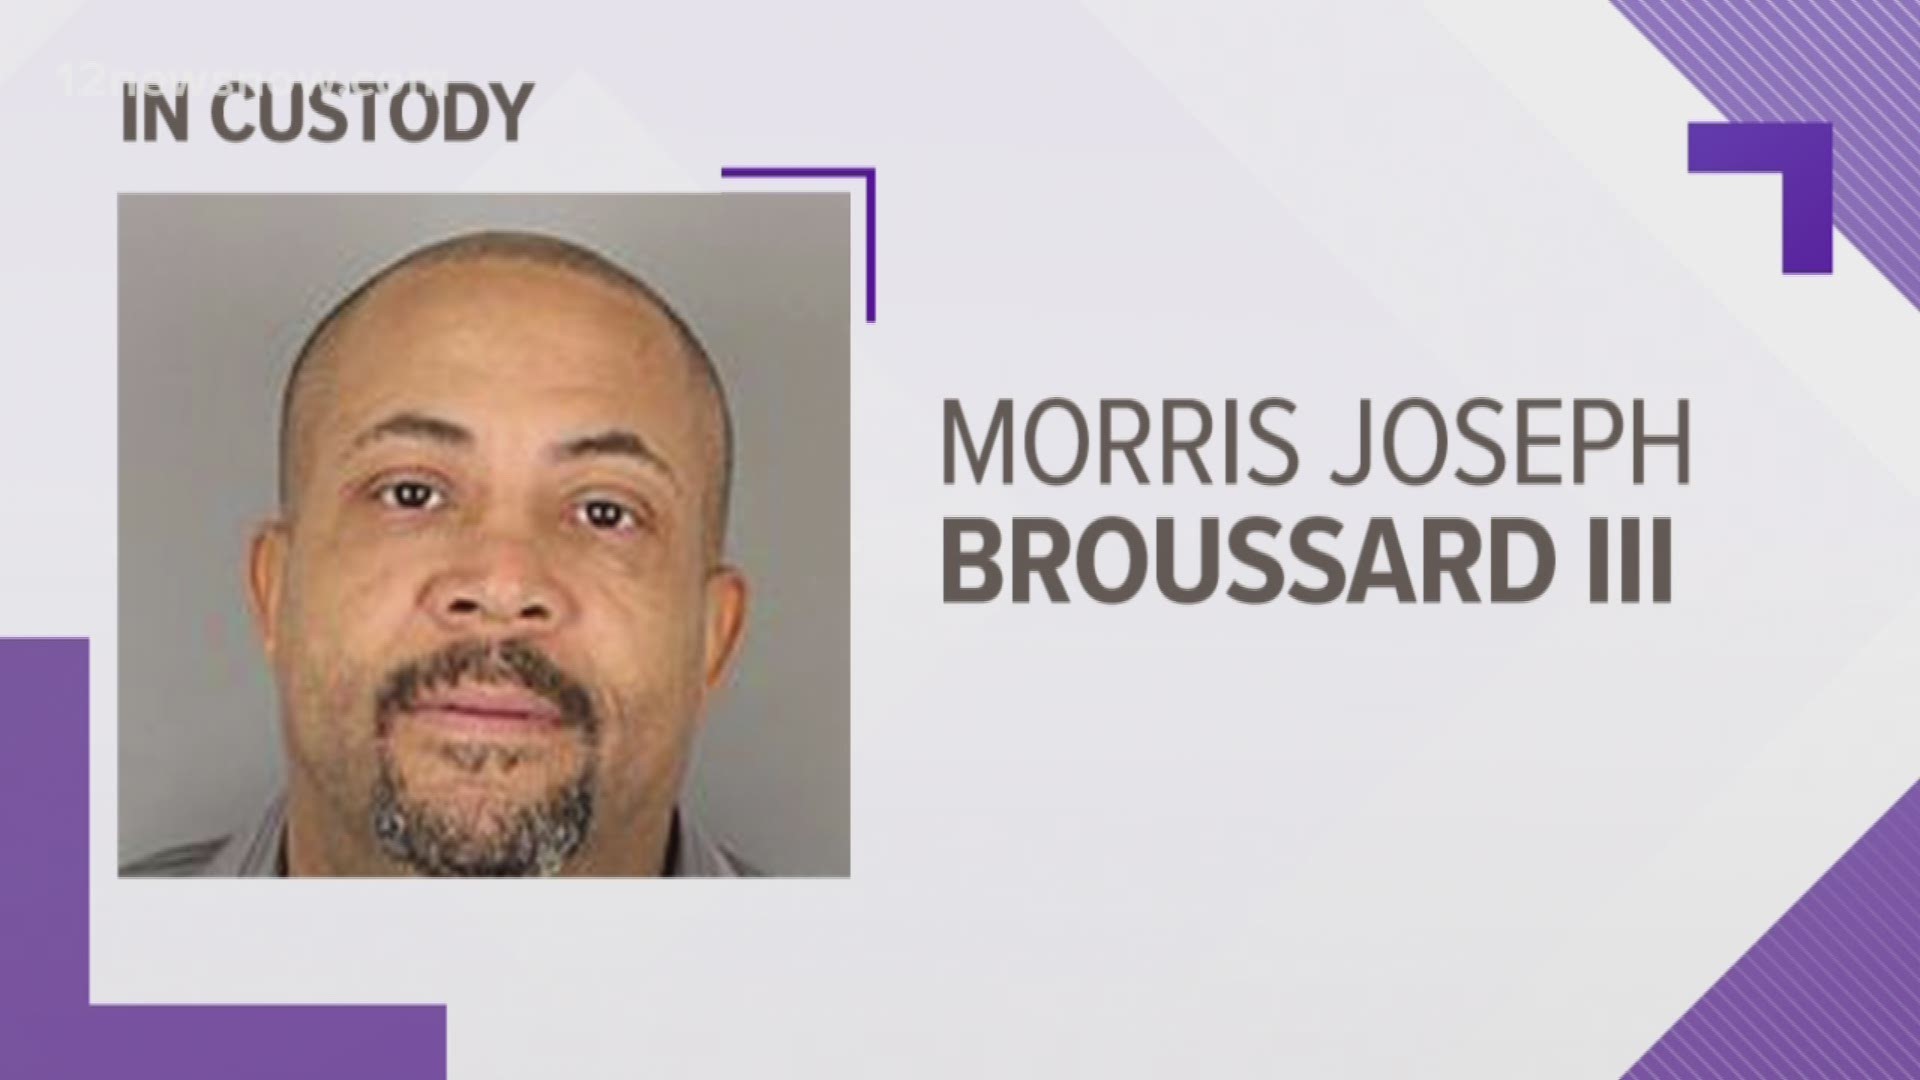 The woman claimed Broussard shot her in the hand and repeatedly sexually assaulted her.